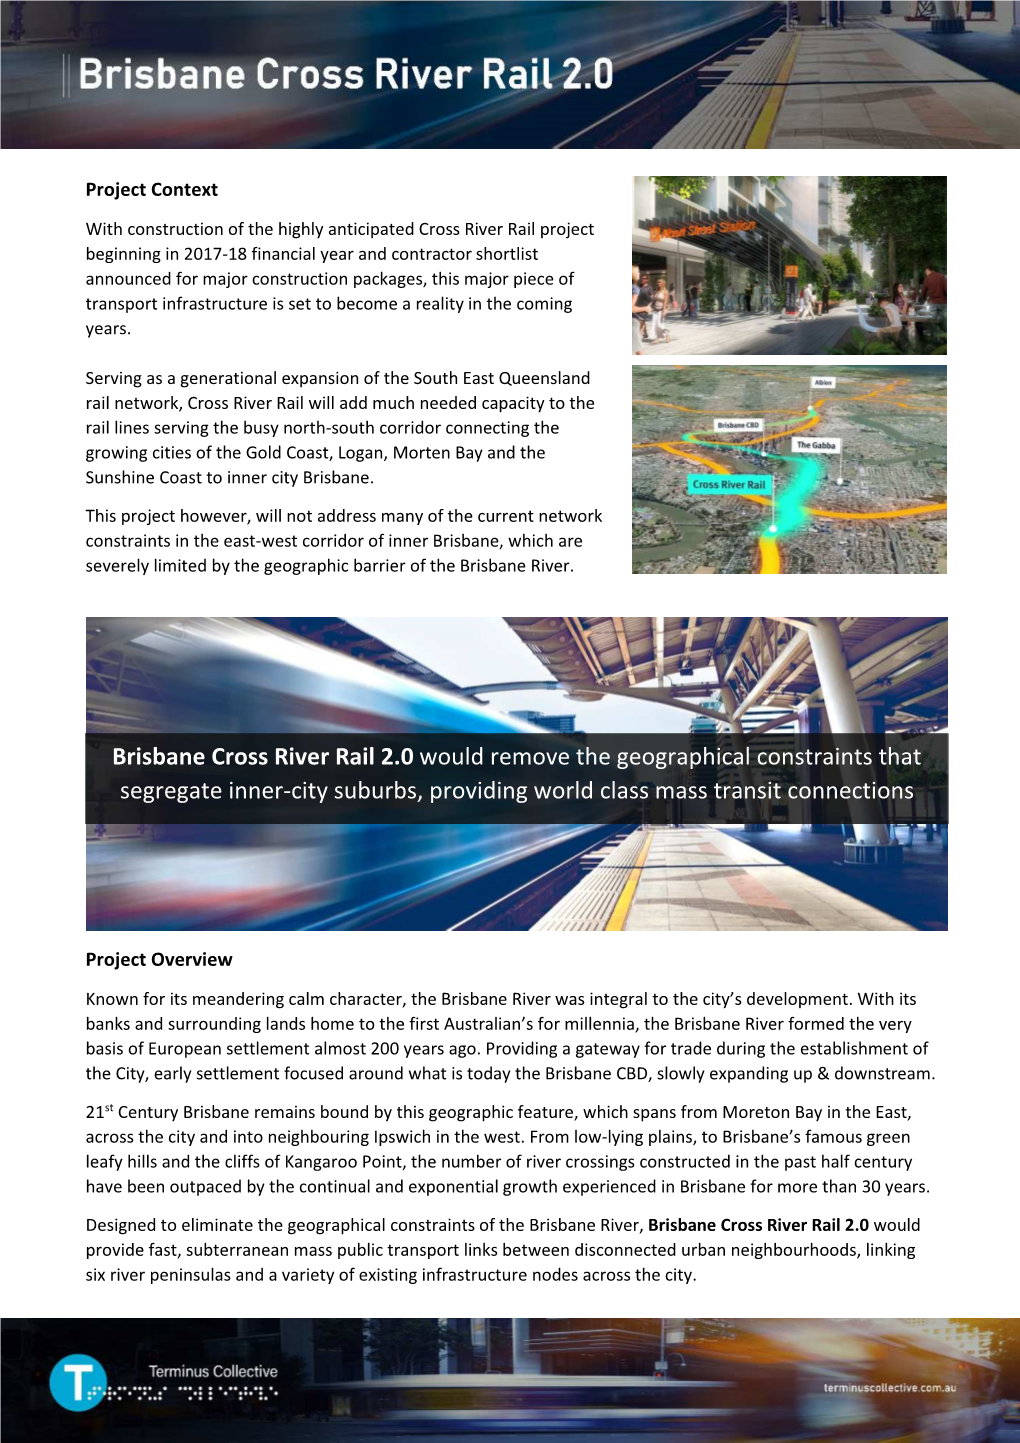 Brisbane Cross River Rail 2.0 Would Remove the Geographical Constraints That Segregate Inner-City Suburbs, Providing World Class Mass Transit Connections